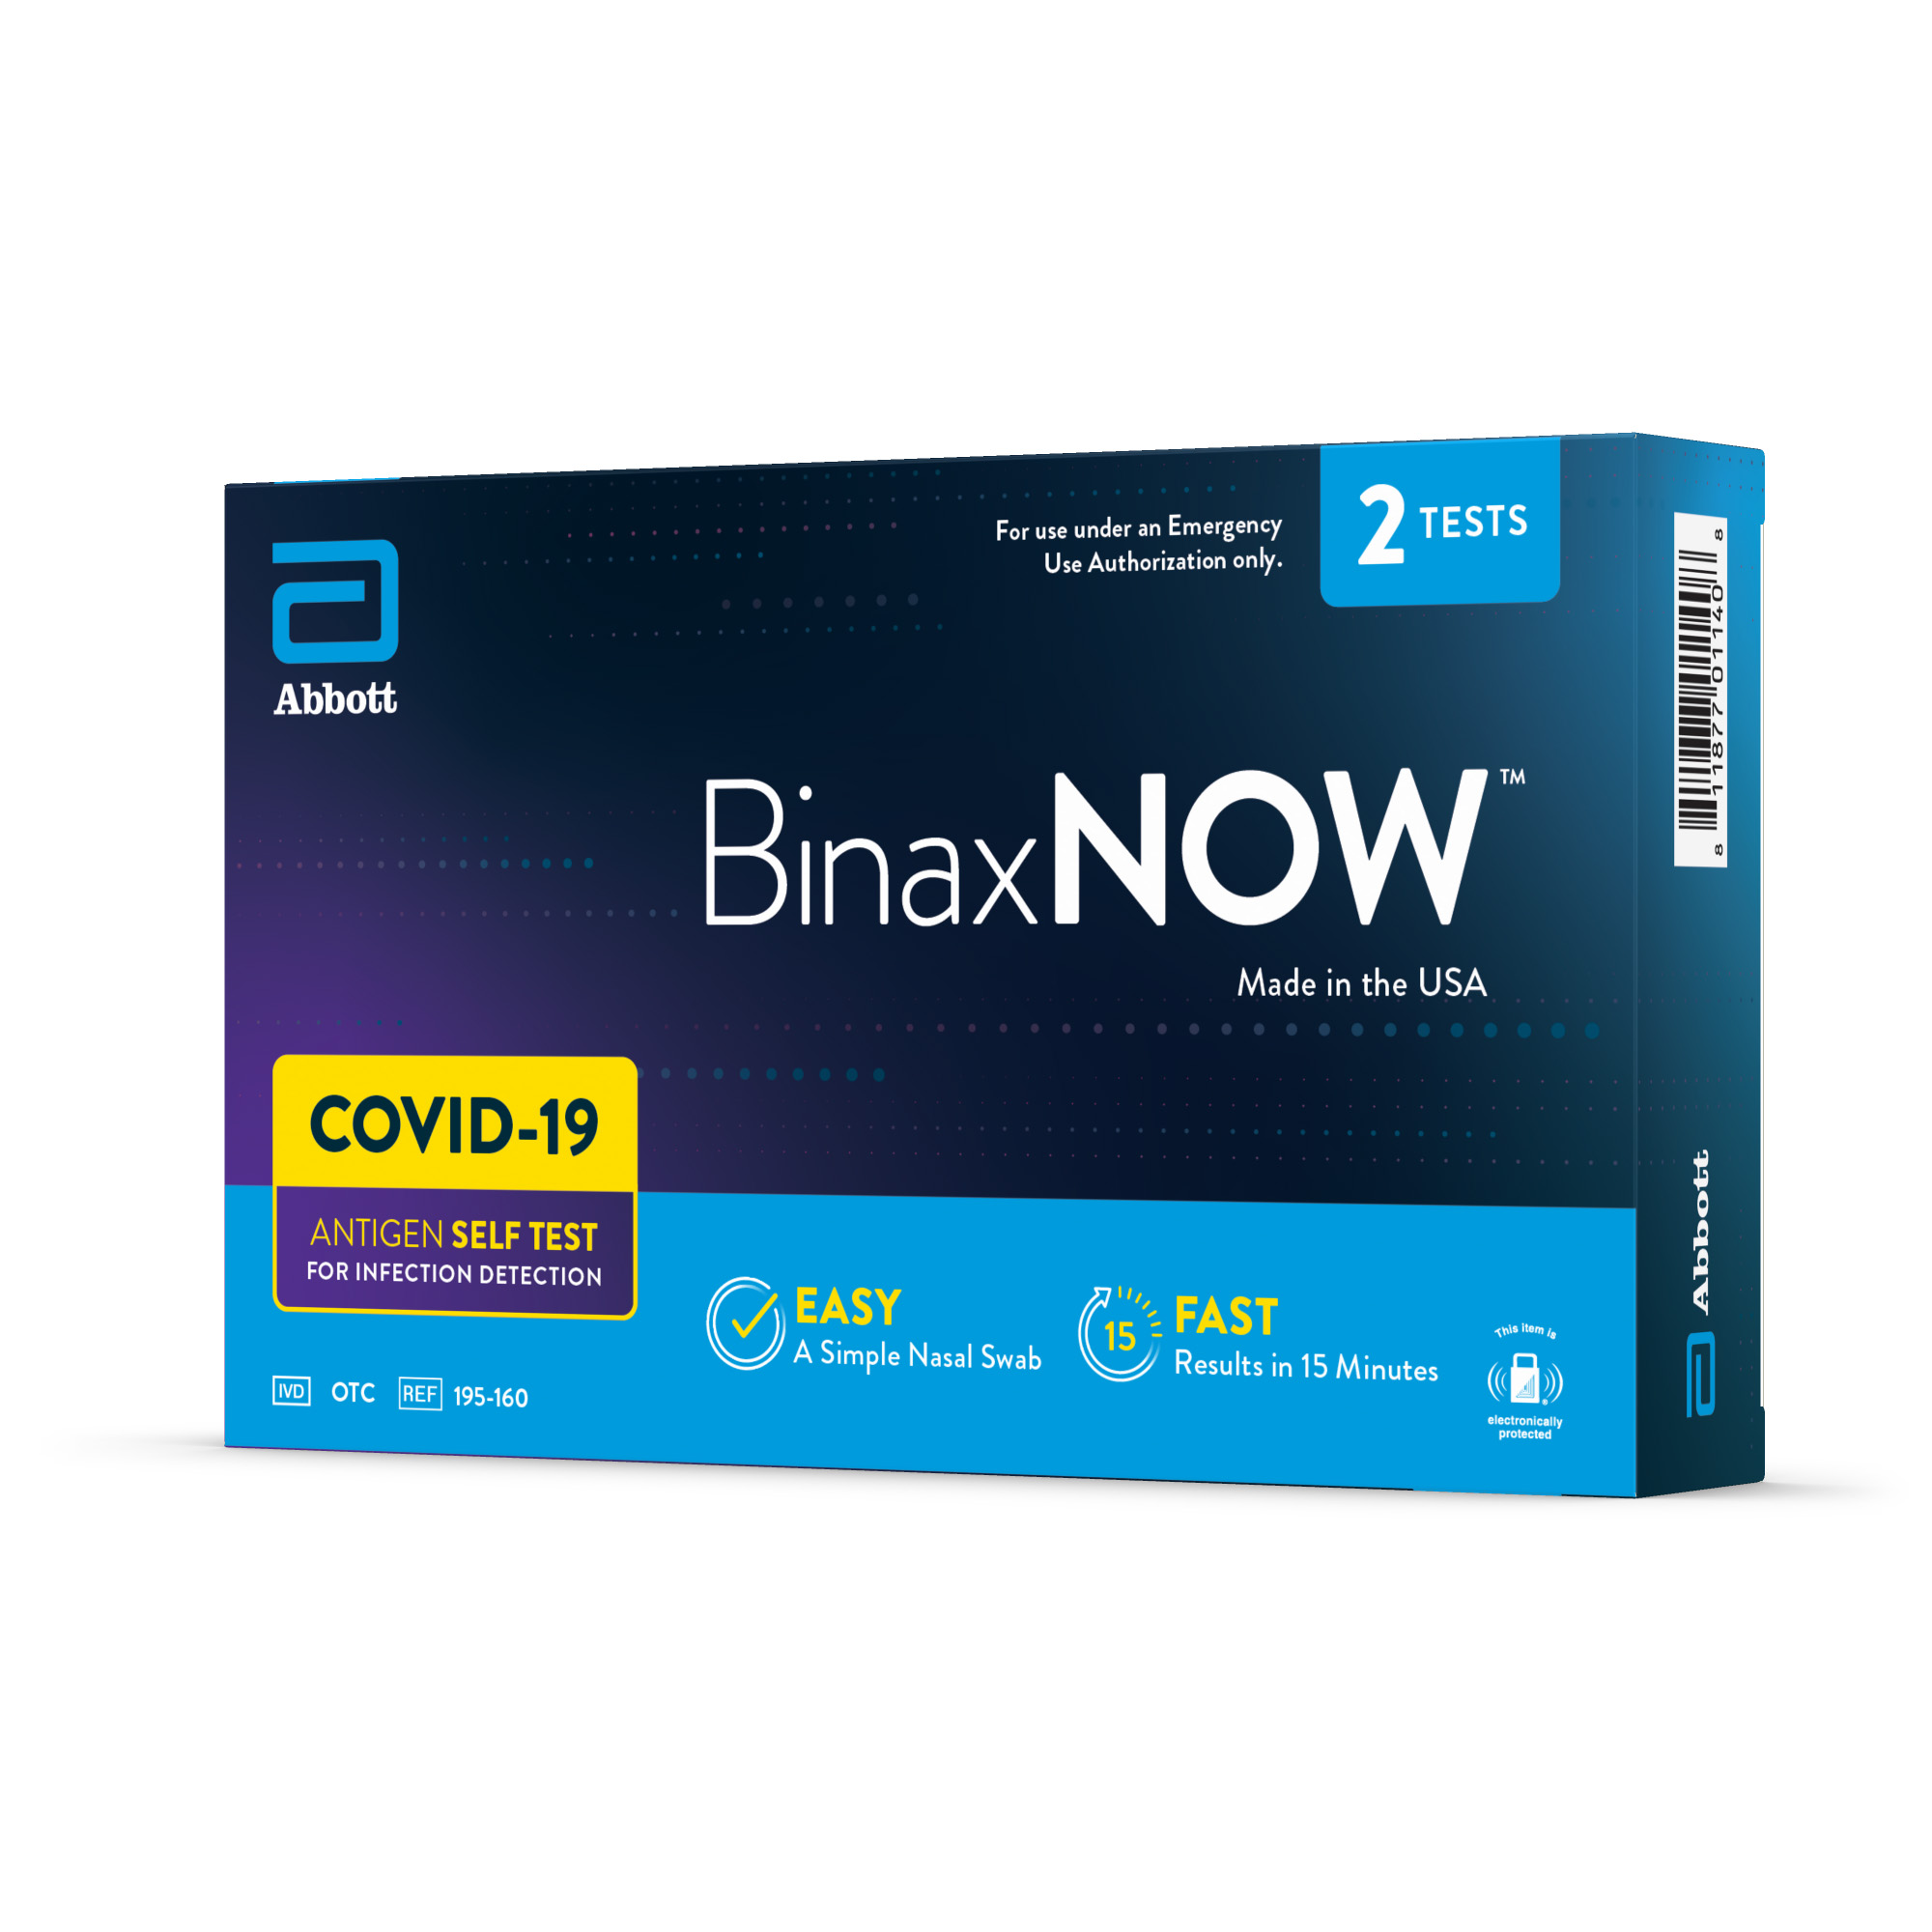 BinaxNOW COVID‐19 Antigen Self Test, 1 Pack, Double, 2-count, At Home COVID-19 Test, 2 Tests - image 4 of 11